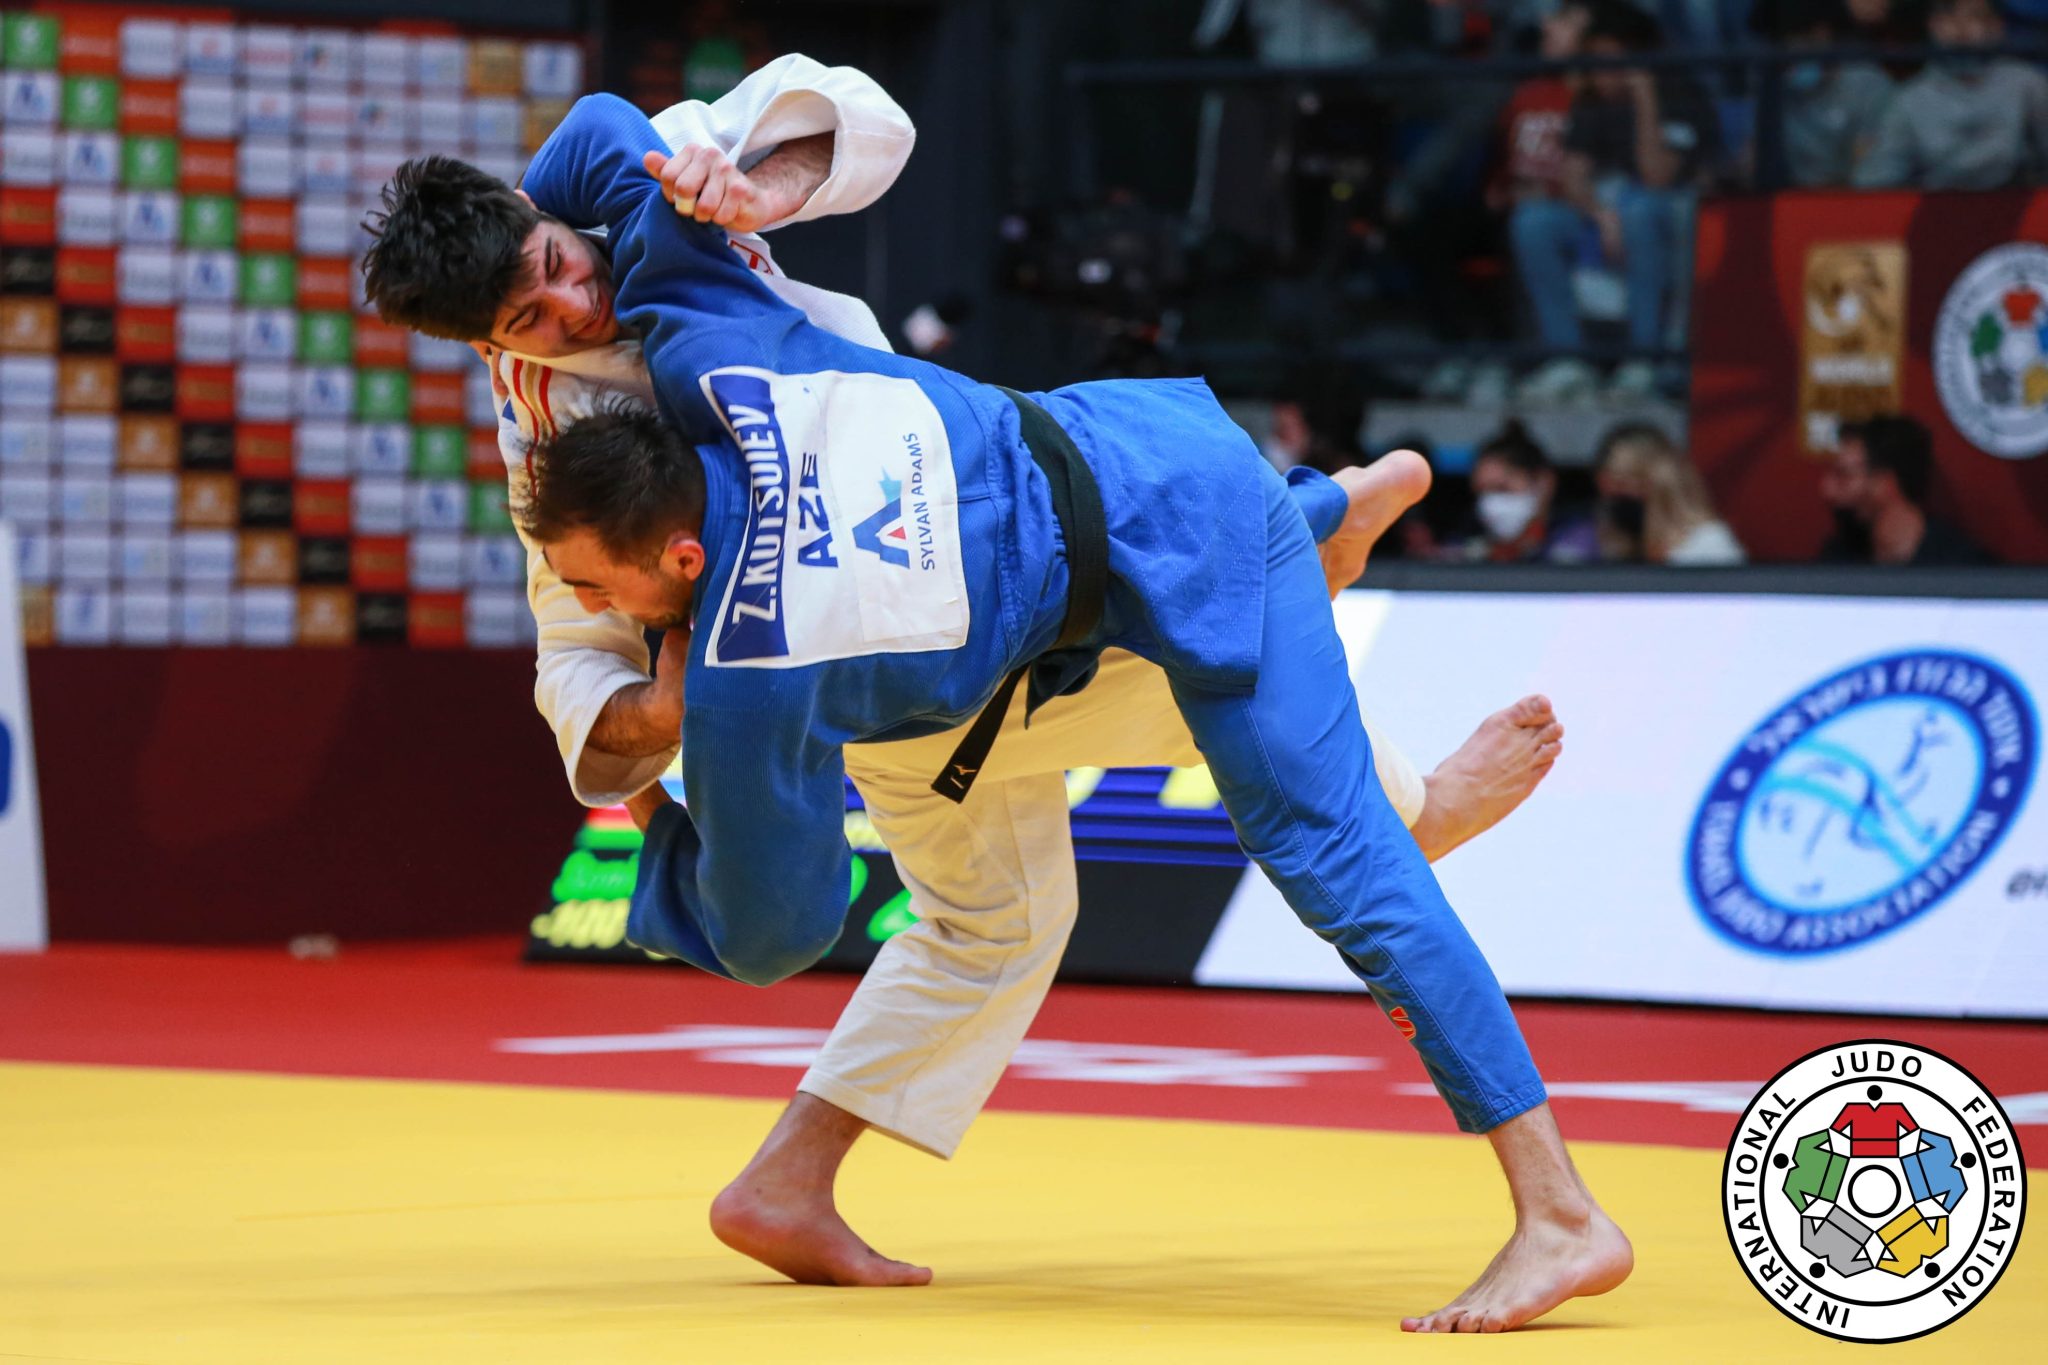 SULAMANIDZE AND PACUT CELEBRATE CAREER FIRSTS WITH GRAND SLAM GOLDS